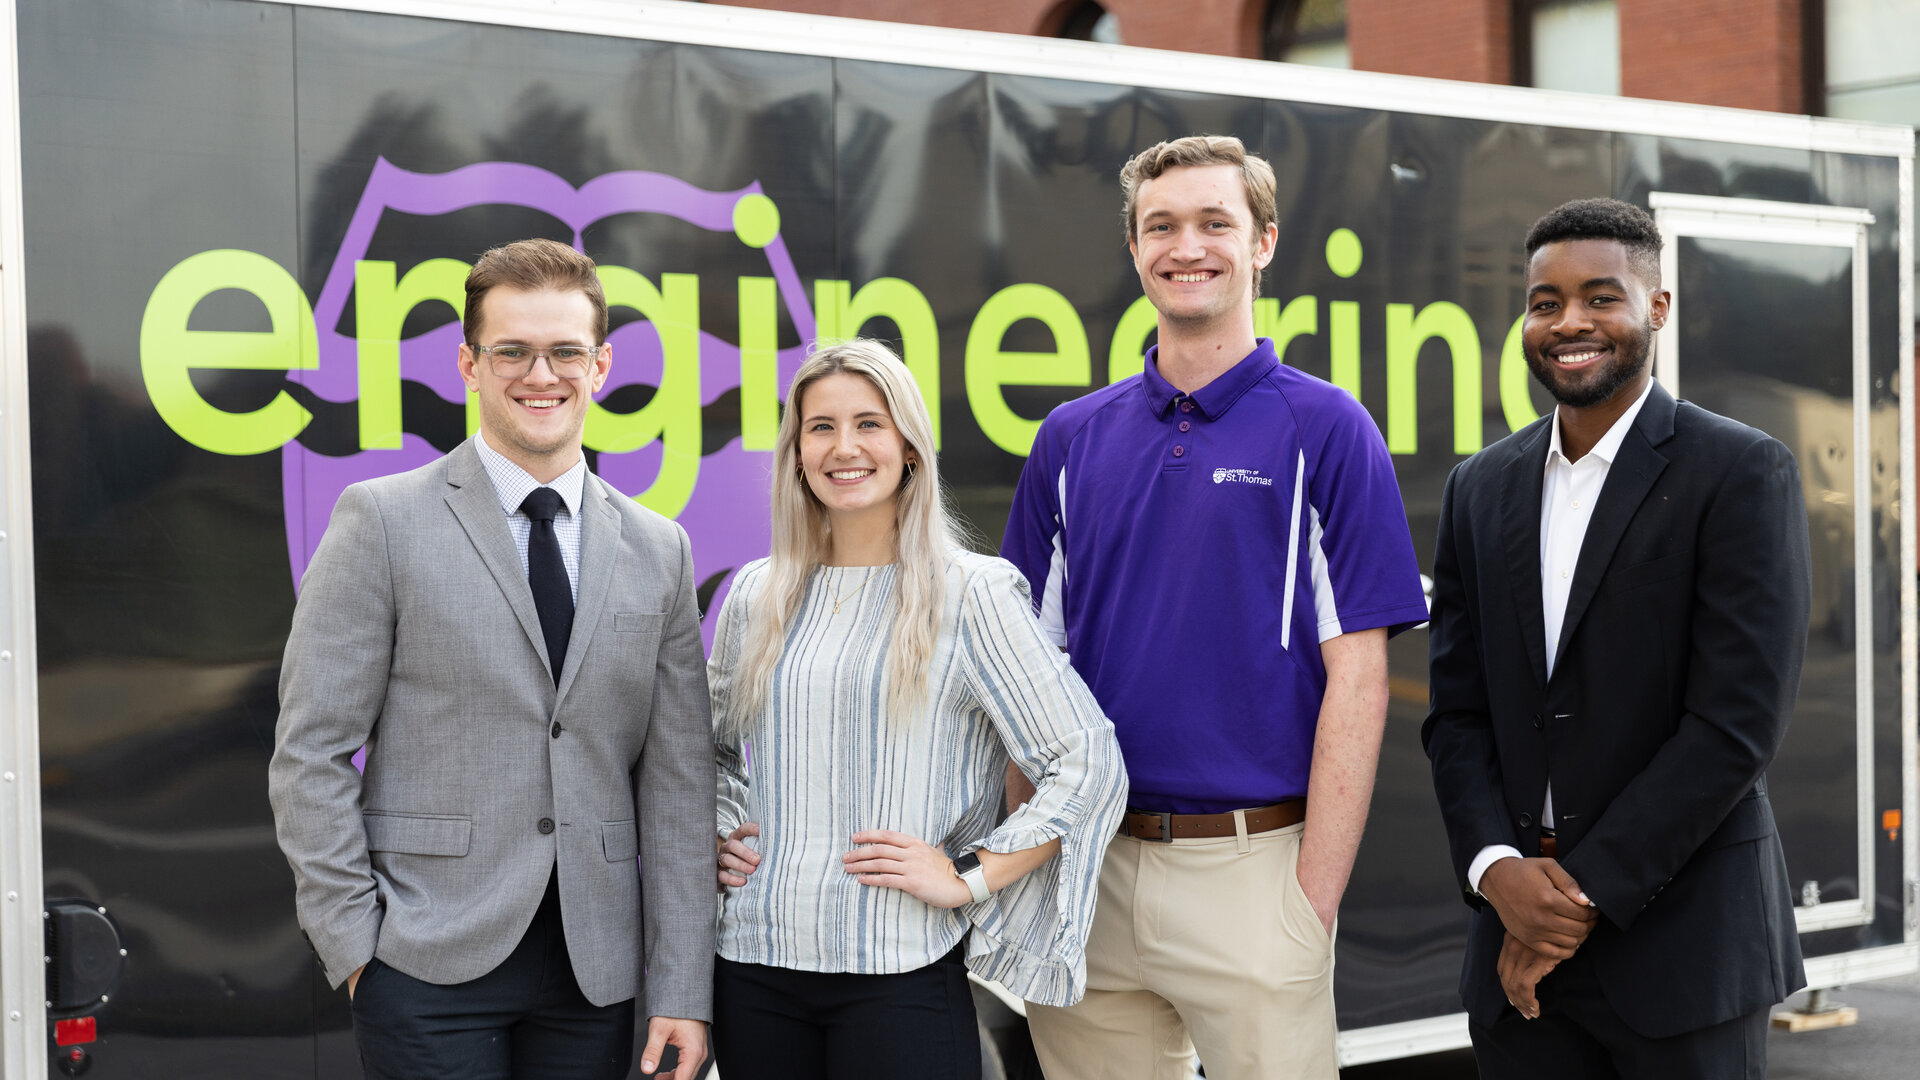 Senior engineering students pose in front of Engineering's trailer.